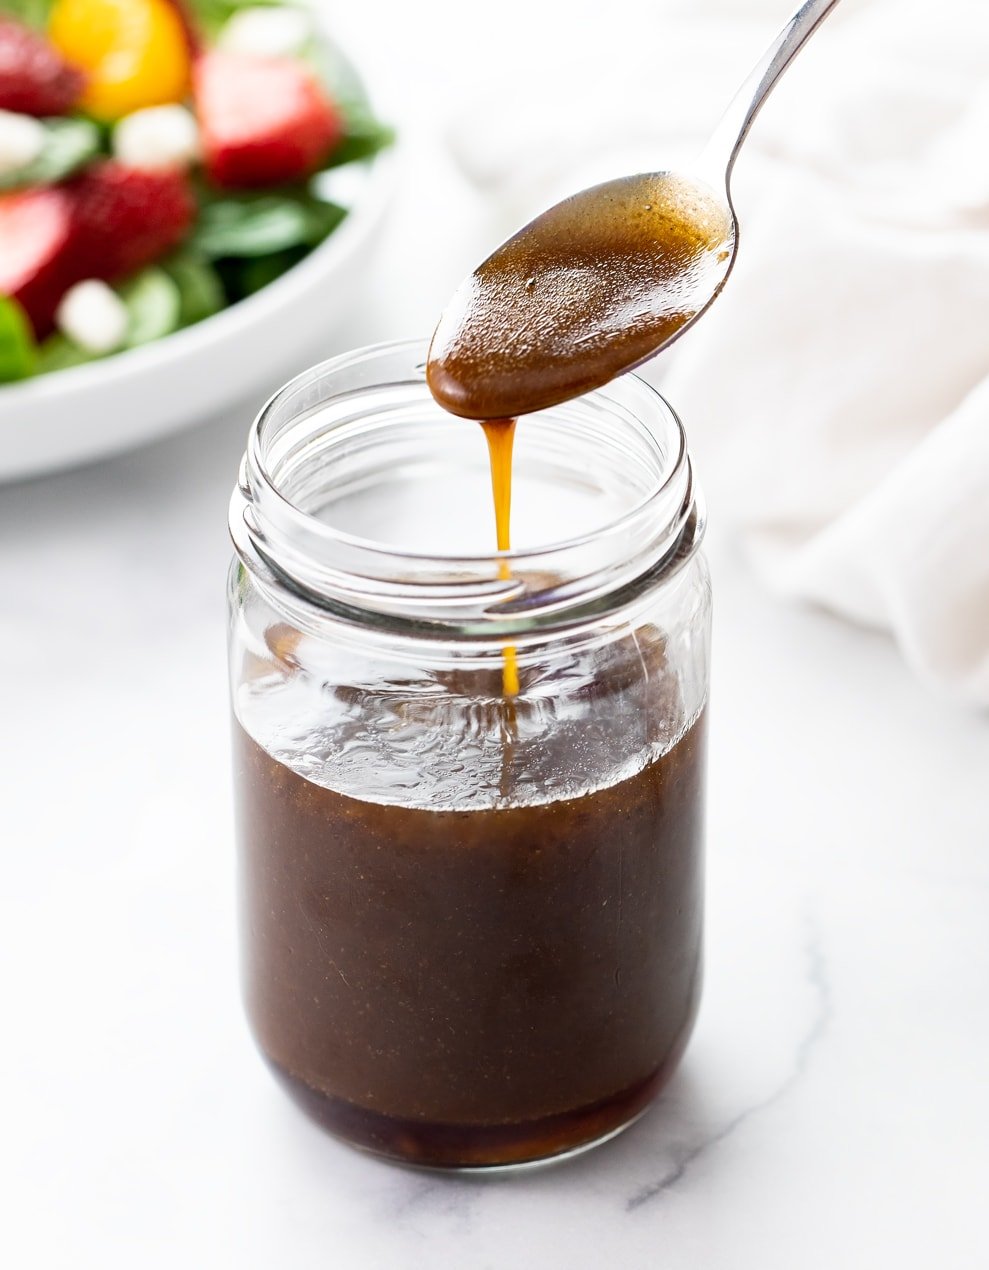 A spoon drizzling Balsamic Vinaigrette into a glass jar with a salad in the background.